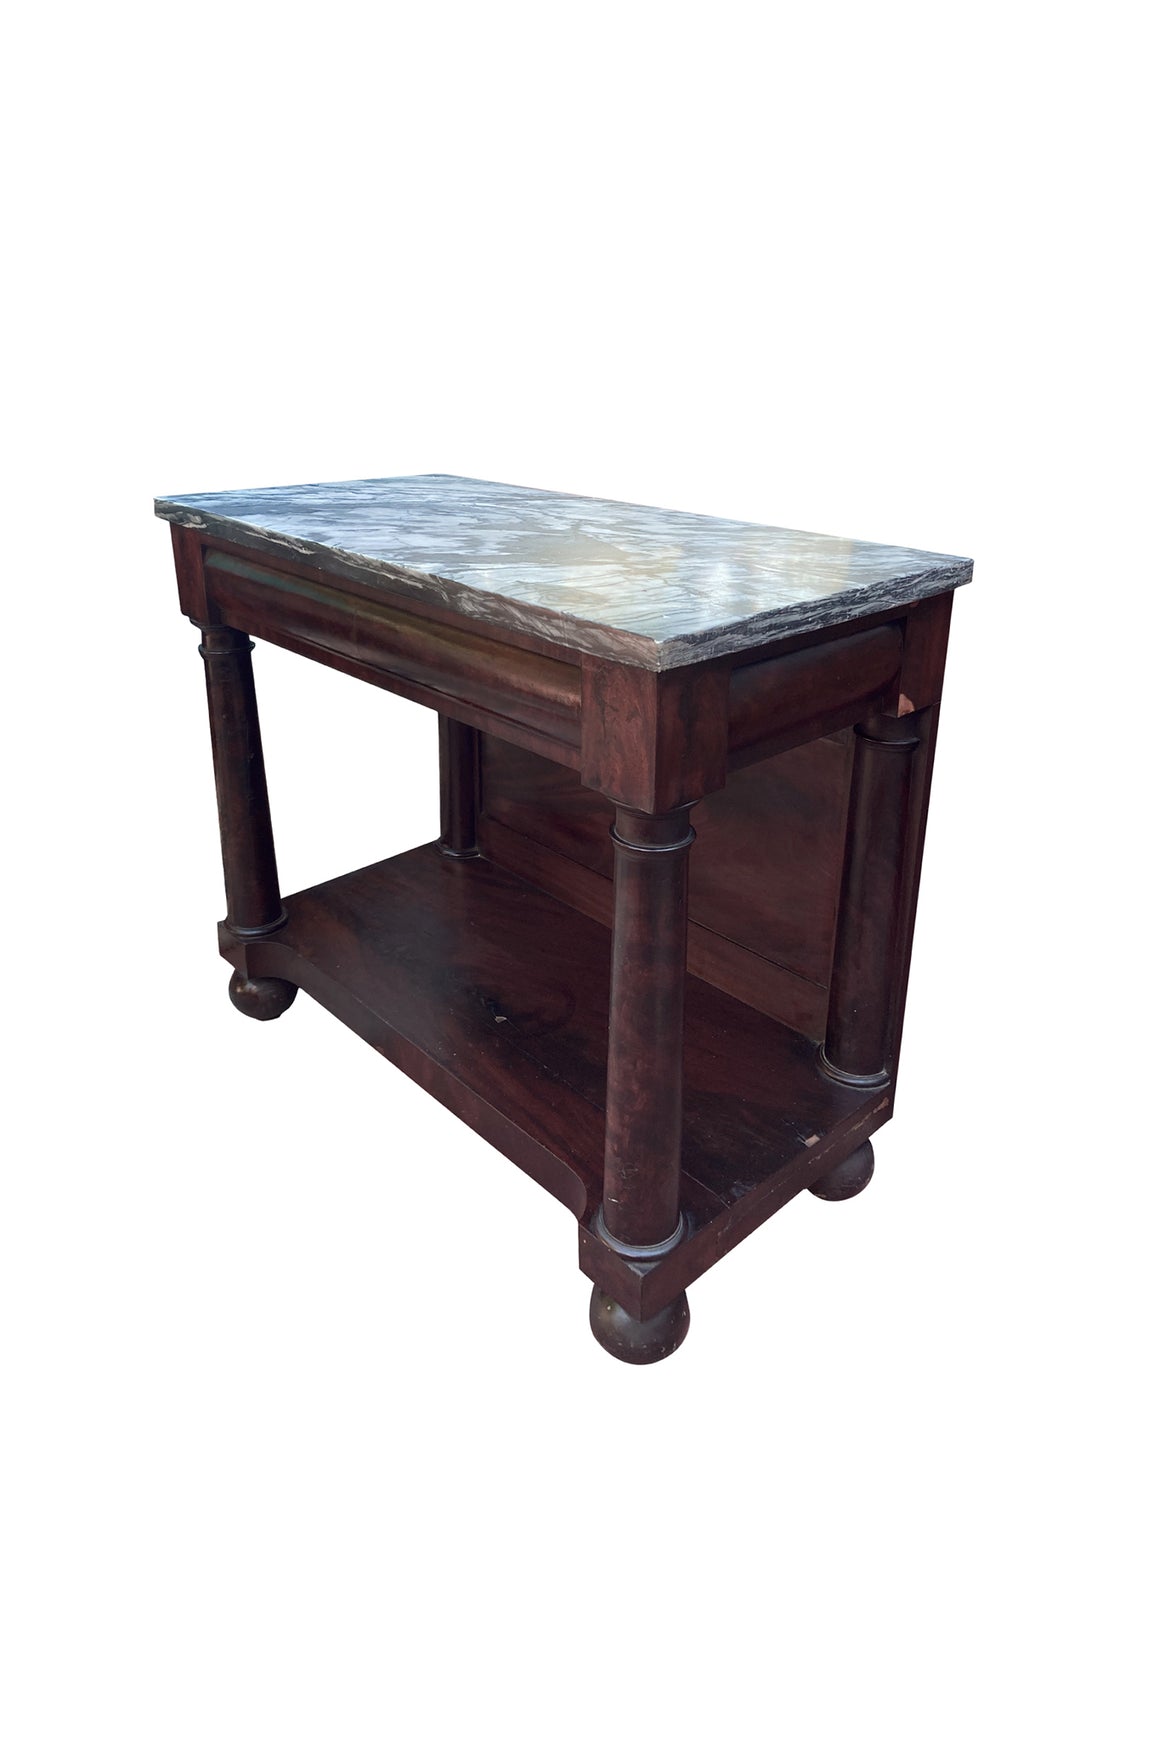 Early 19th Century Federal Marble-Top Pier Table - ON HOLD